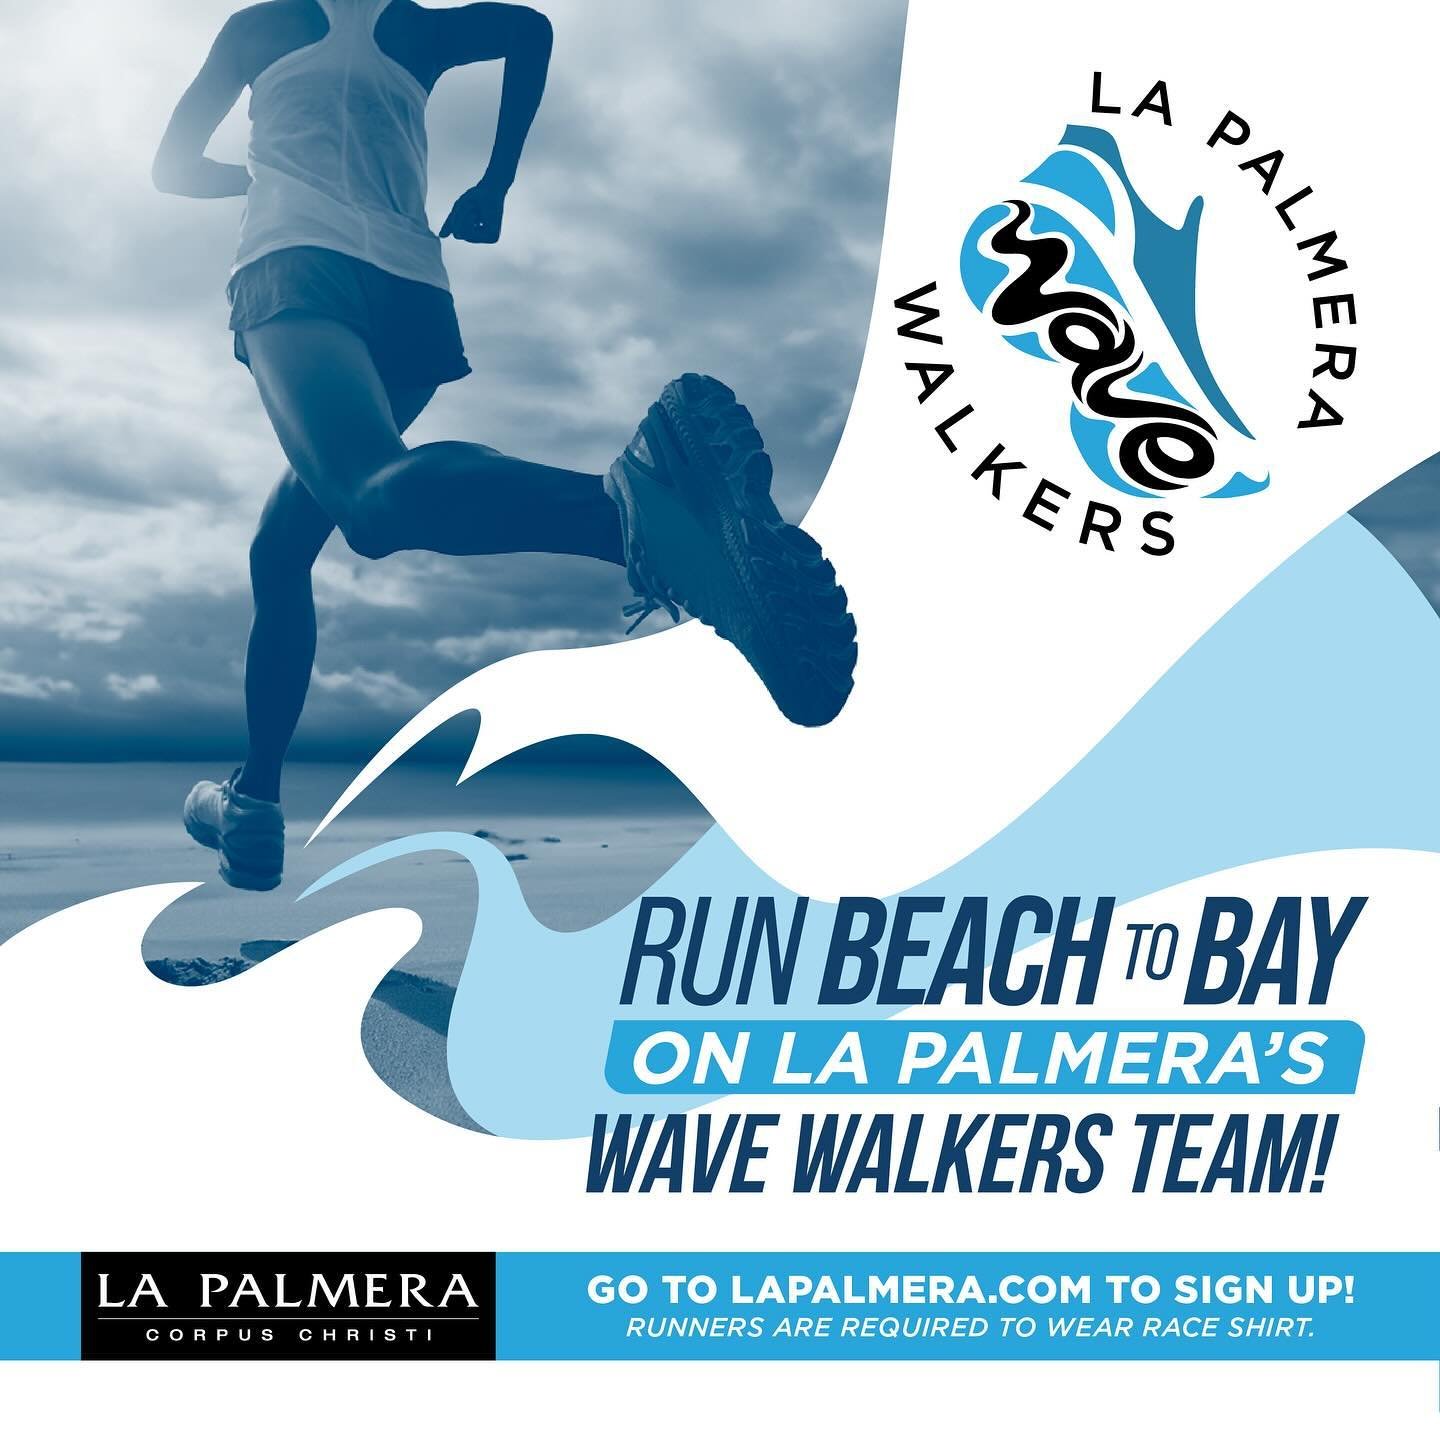 UPDATE! We have two spots on our Beach to Bay team now open for this Saturday! DM us ASAP if you are interested in running Leg #3 or #5. Registration is covered!